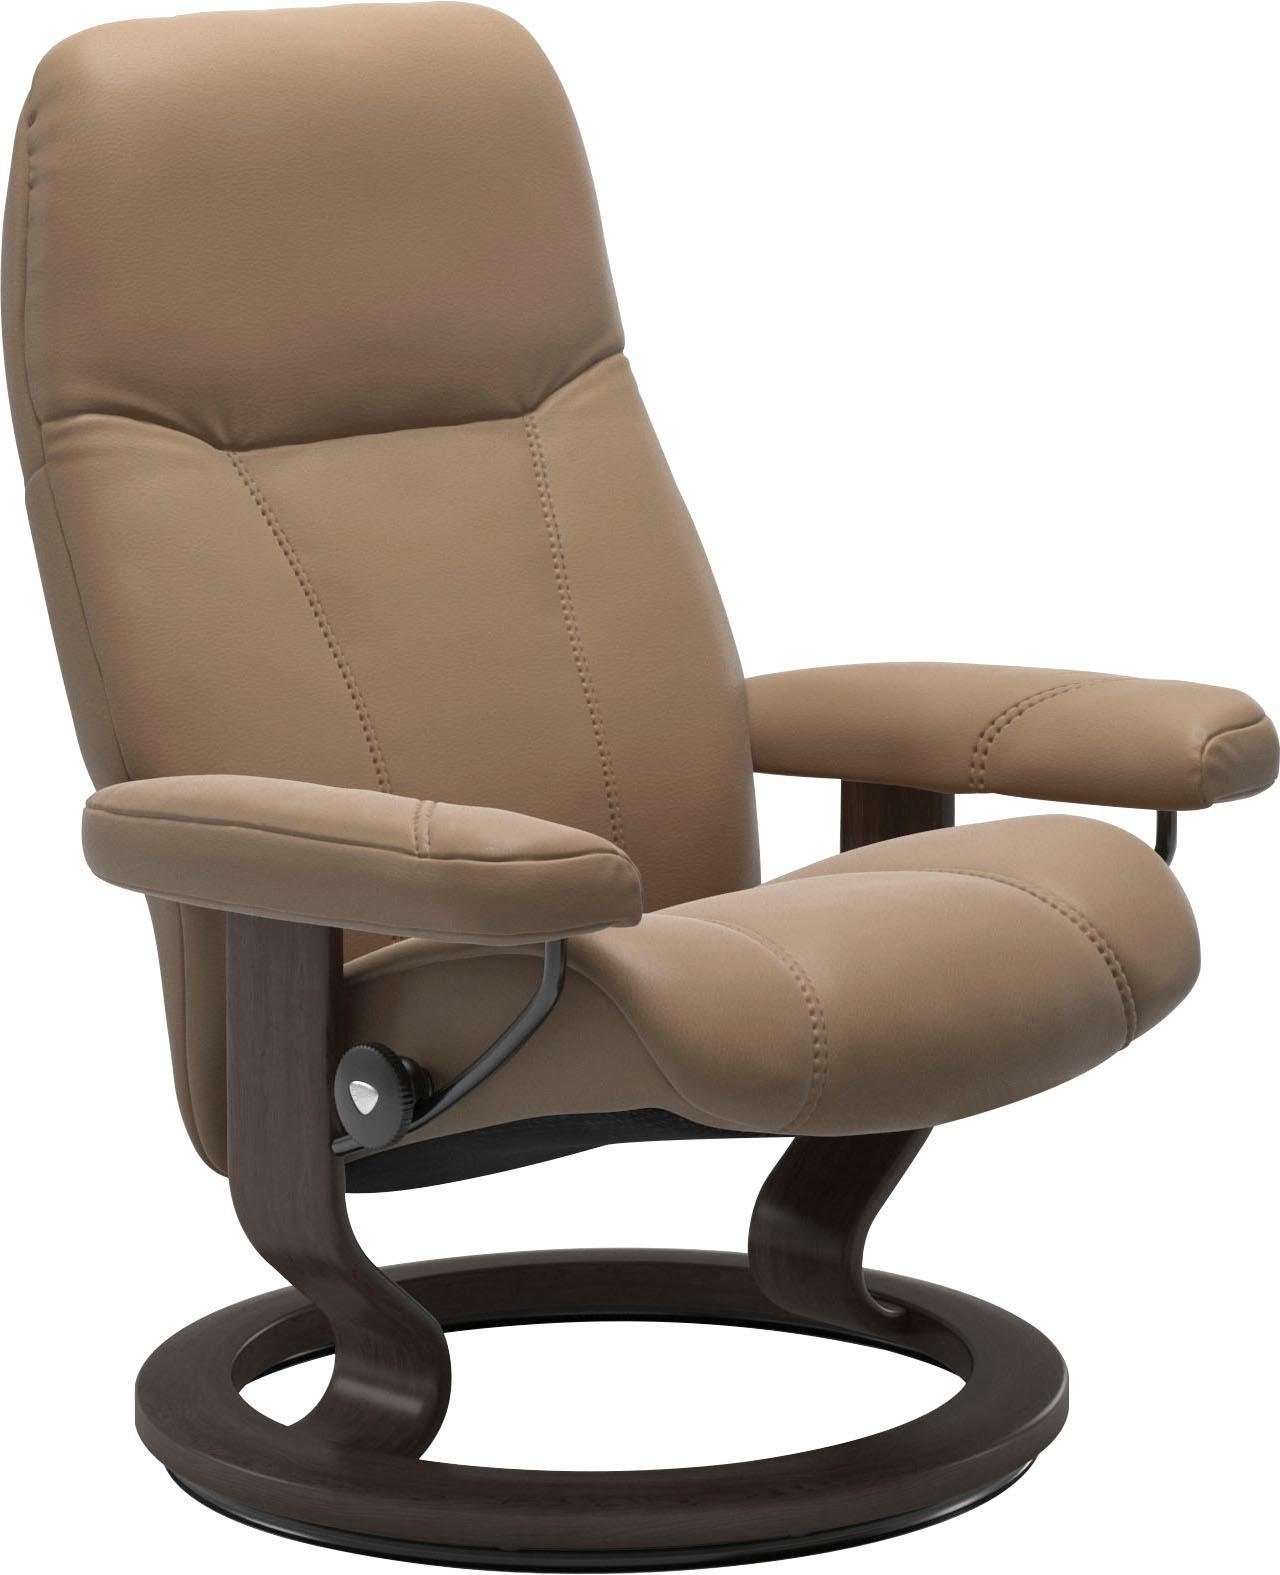 Relaxsessel mit Classic Base, Größe S, Wenge Consul, Stressless® Gestell